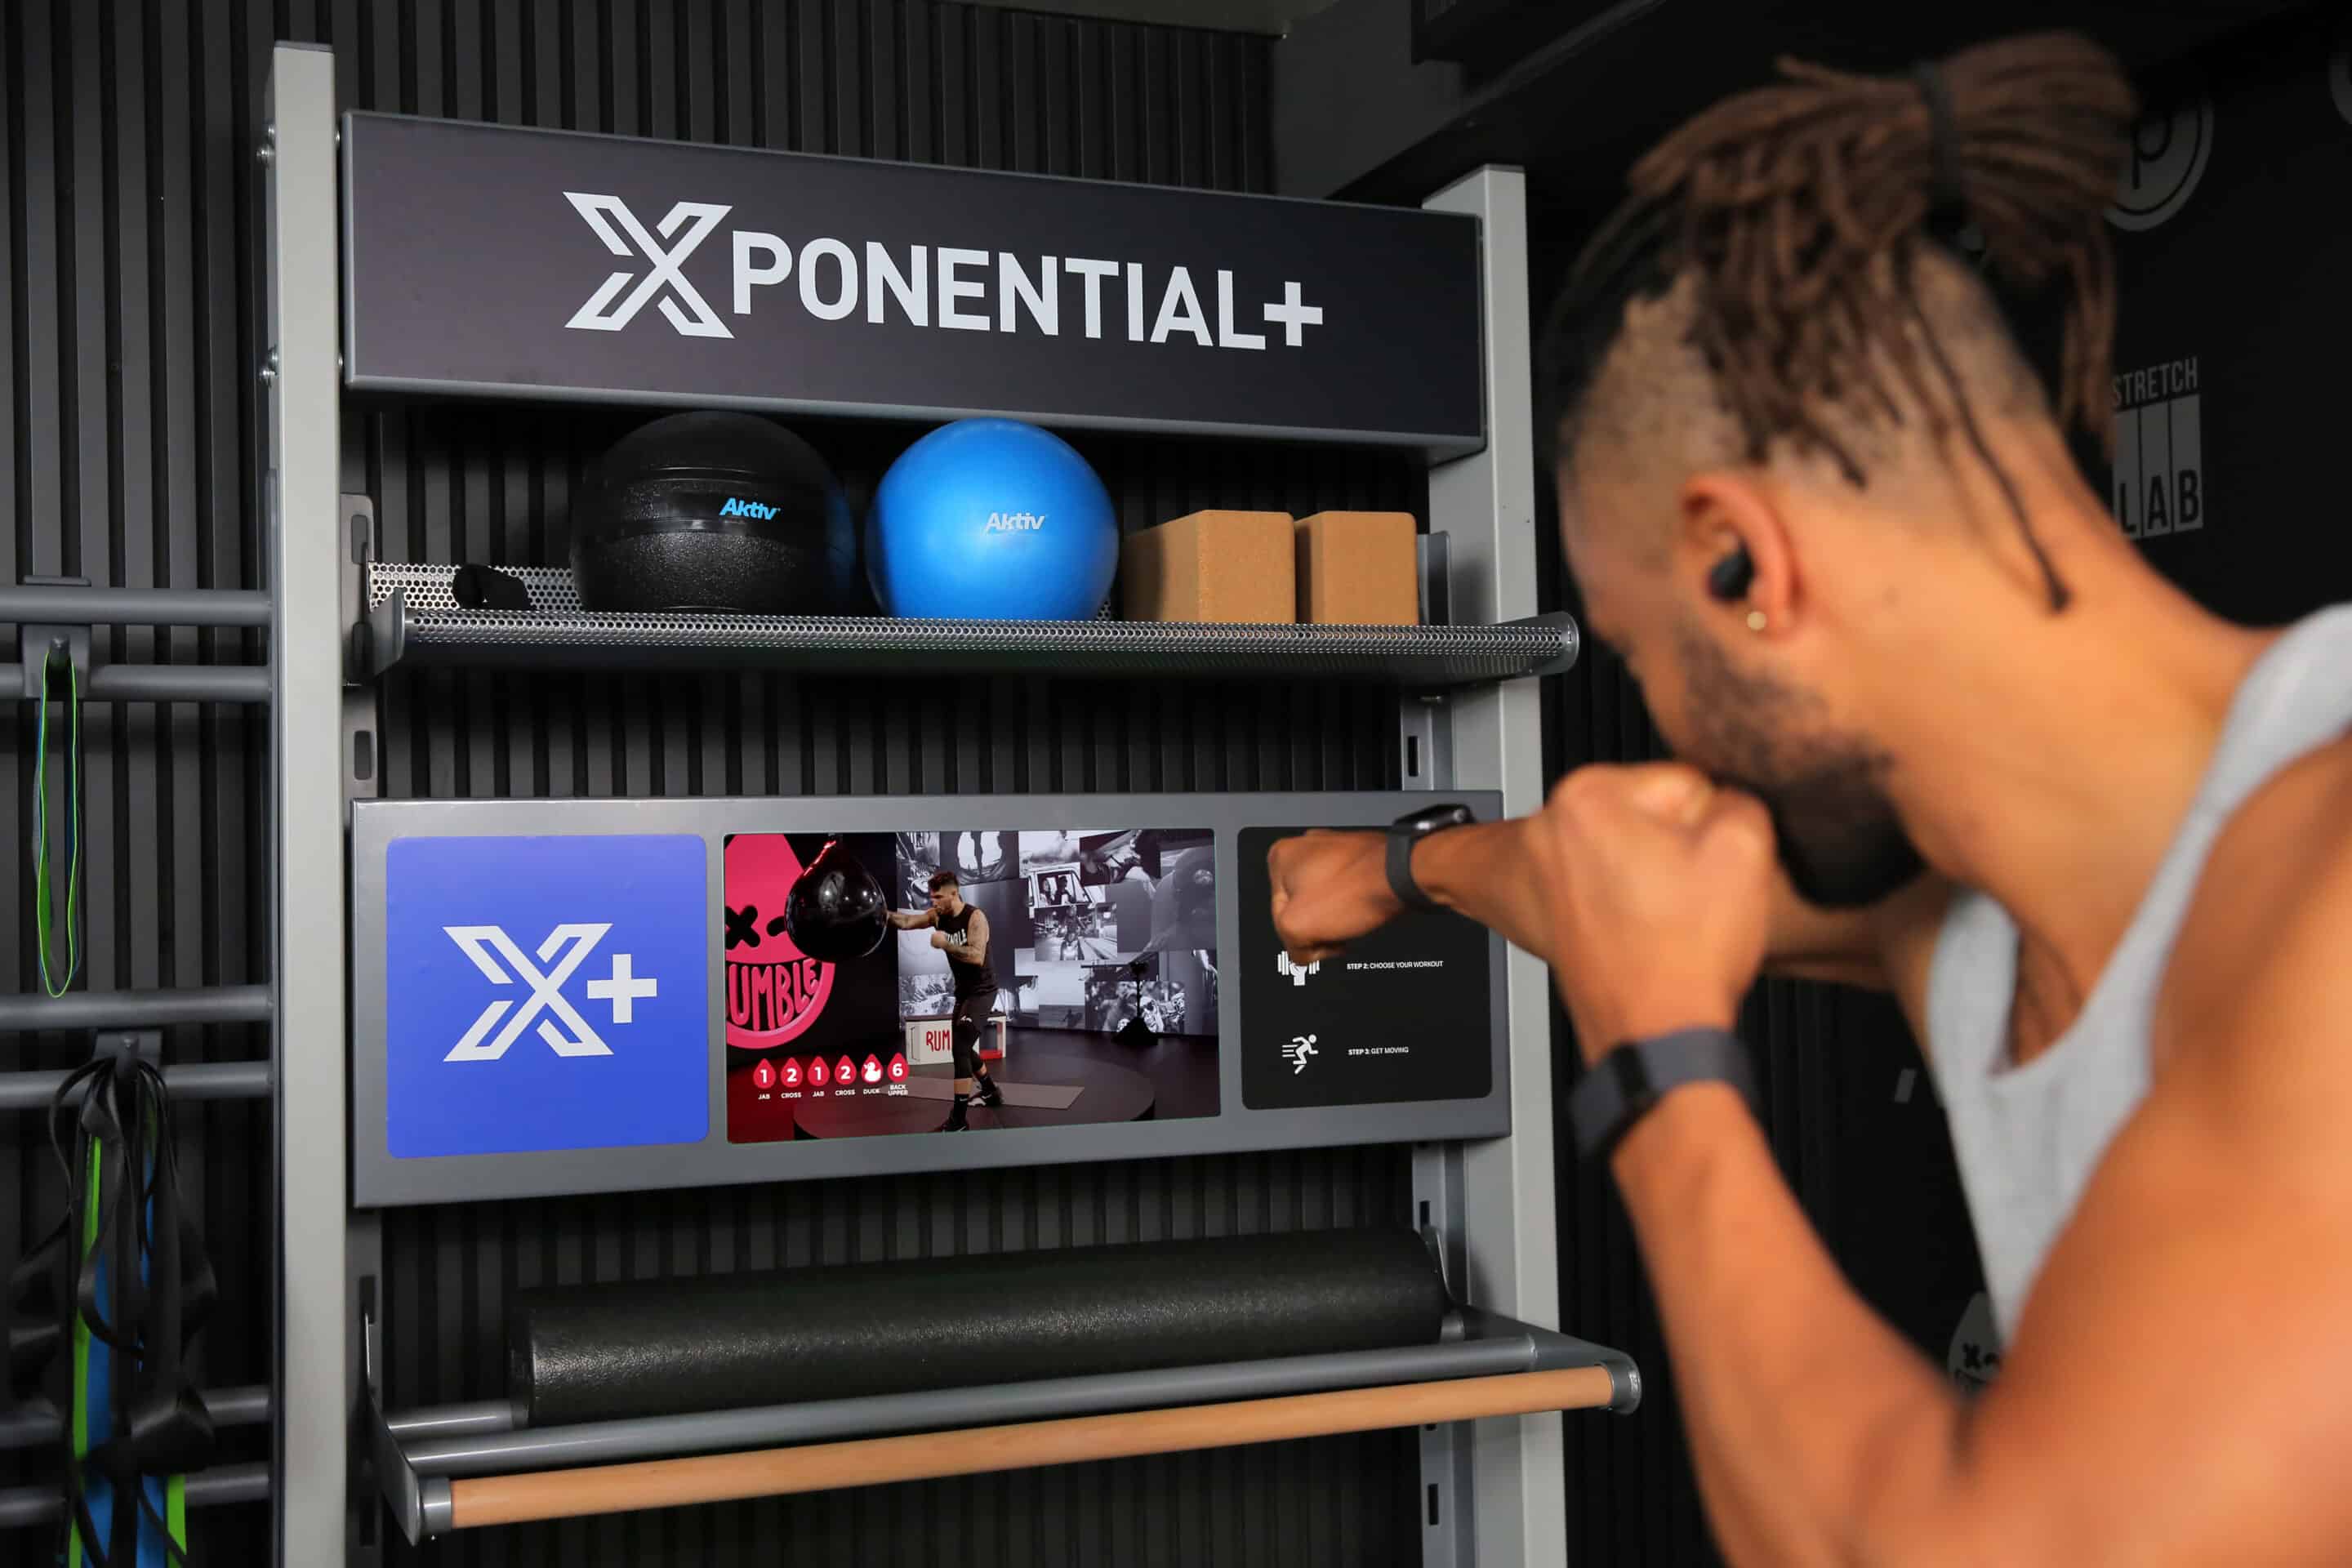 Working out in apartment gym with Xponential+ app.